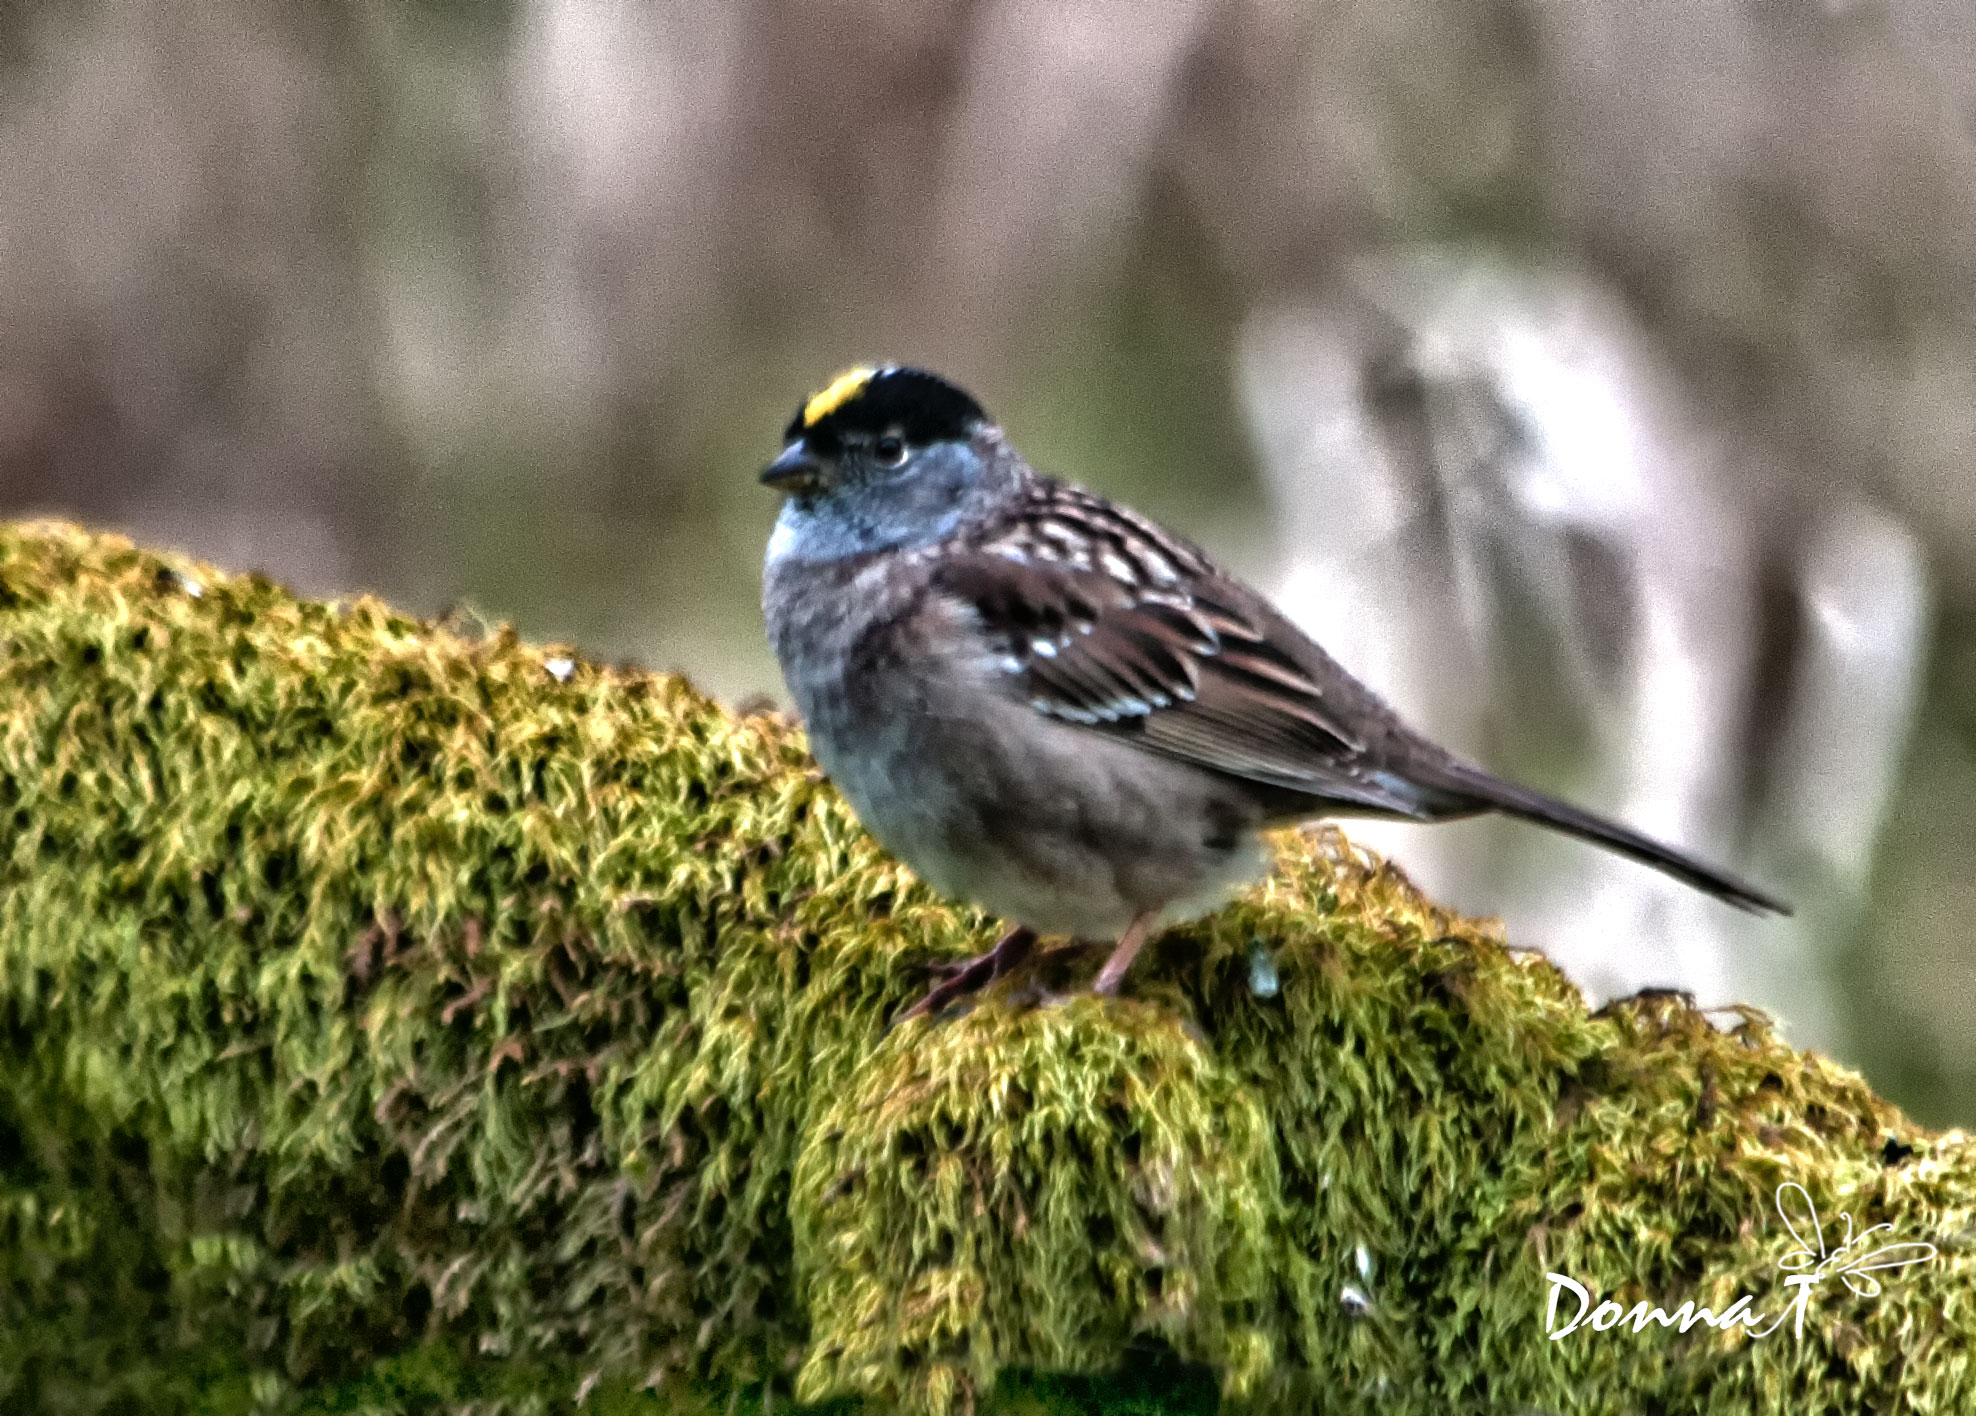 Mossy Yellow Crowned Sparrow